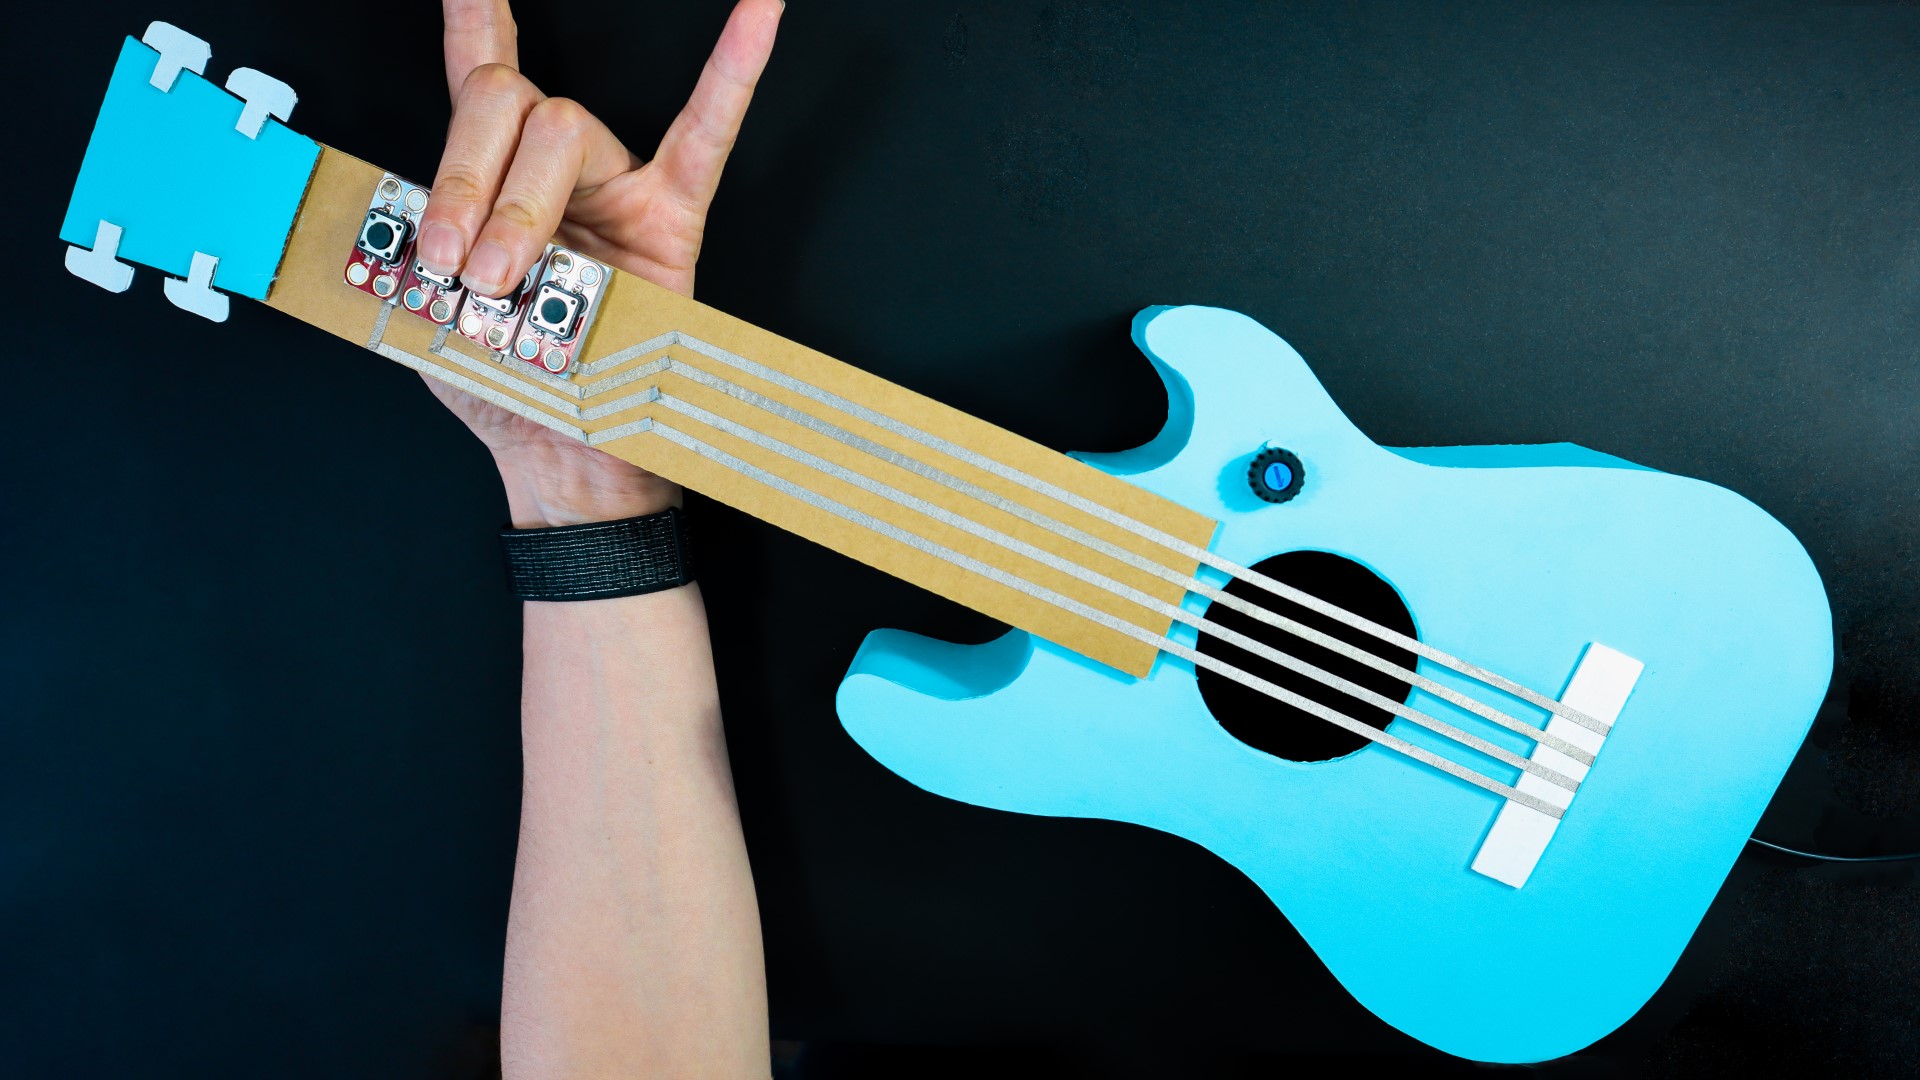 This Instrument Uses The Most Powerful Musical Chord Progression To Make You Rock